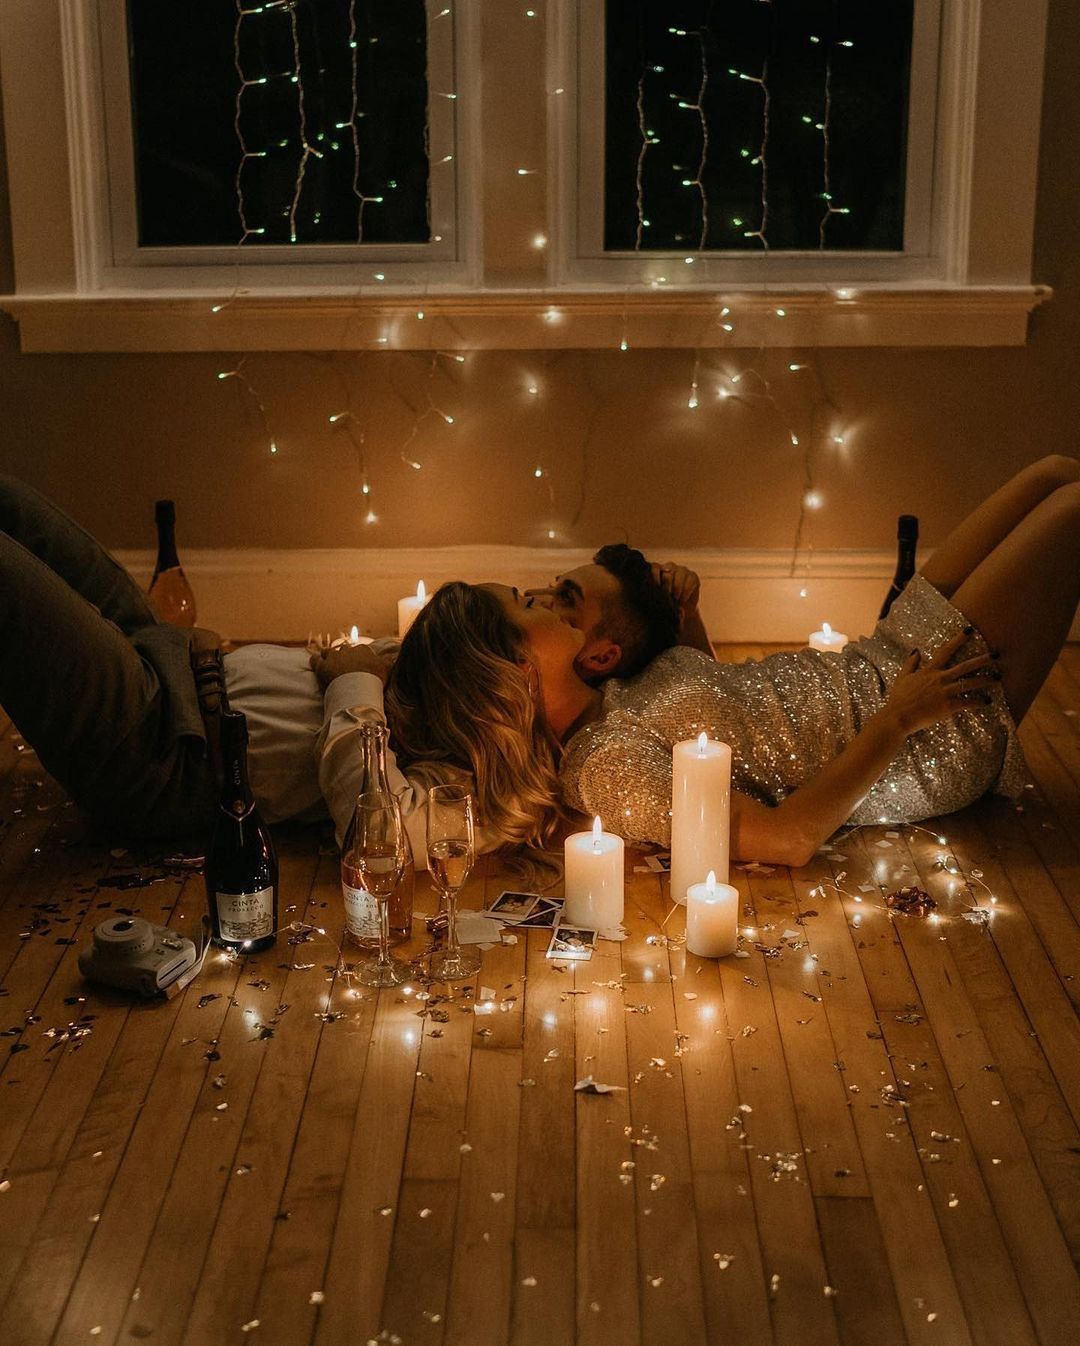 Night couple photo poses Love Songs for Her aishaleephotography1